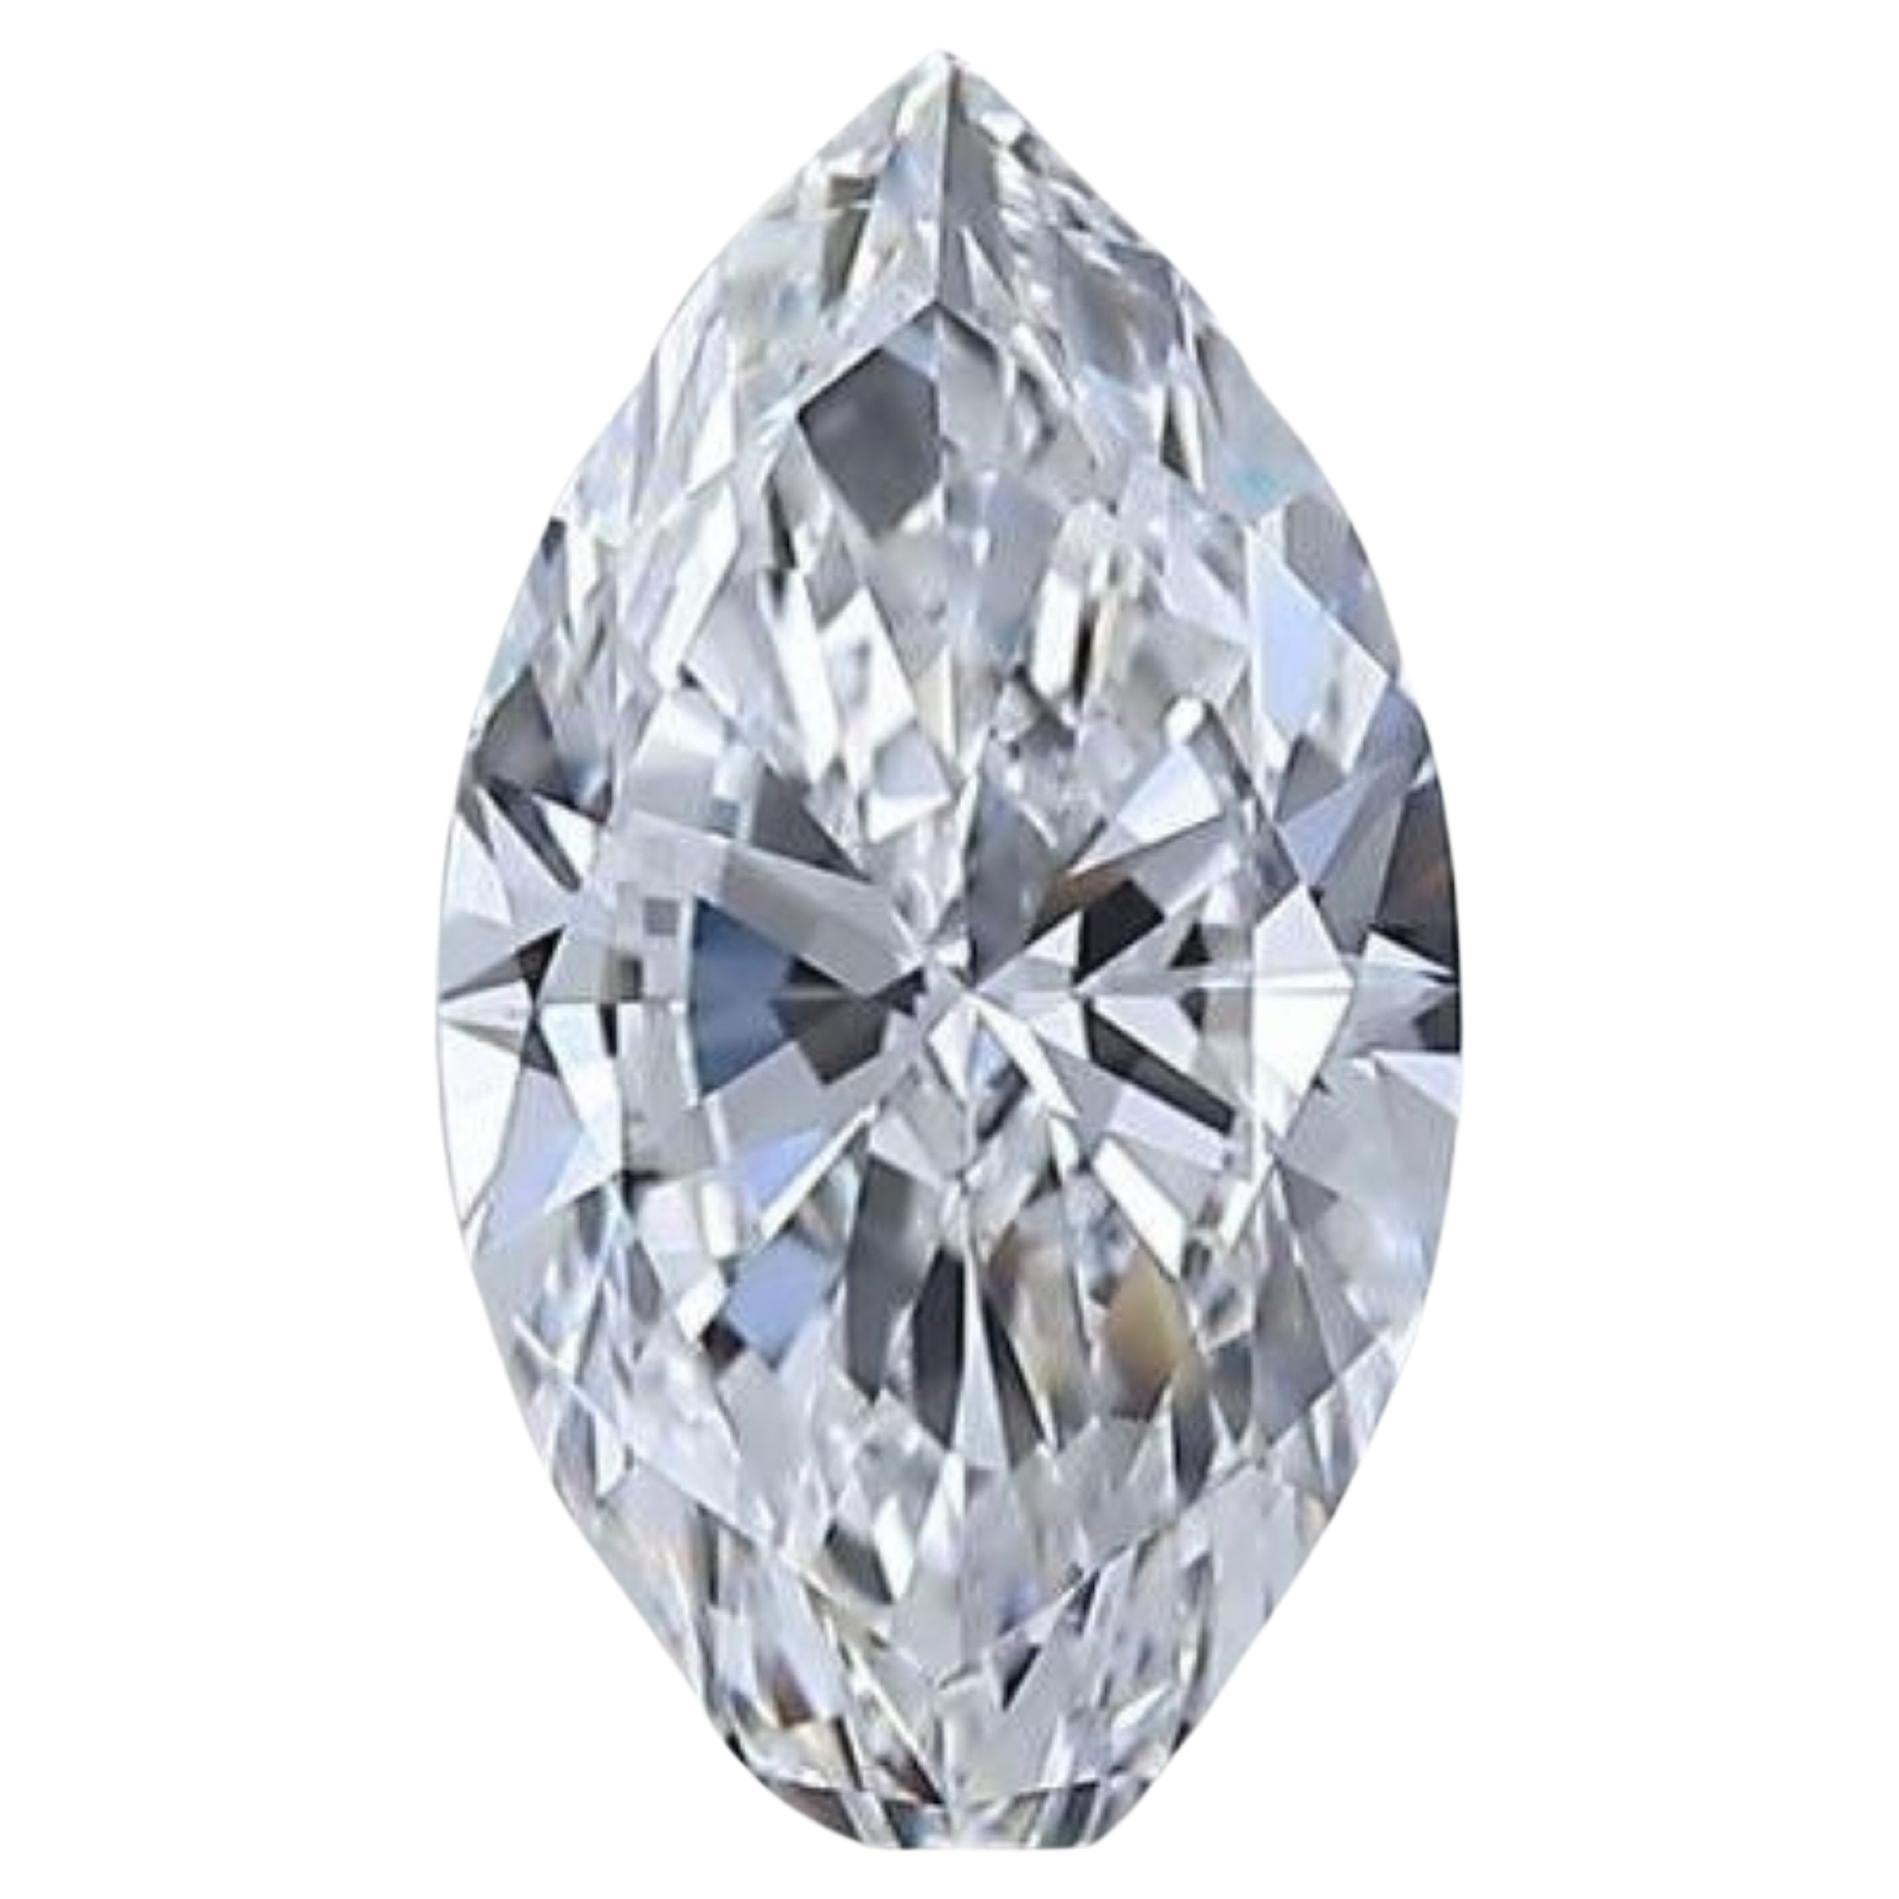 1pc. Shimmering .7 Marquise Cut Natural Diamond For Sale